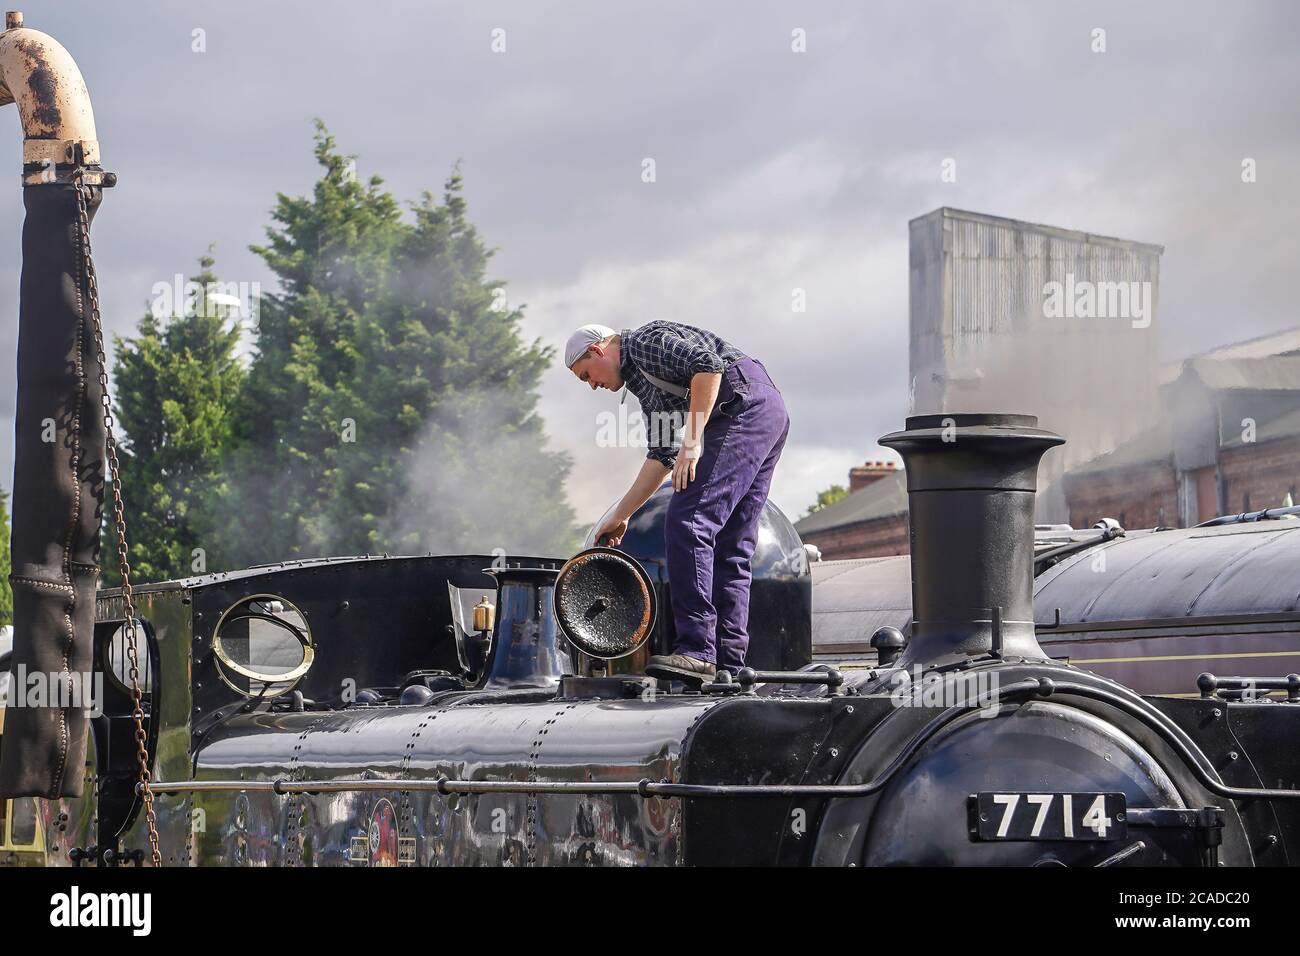 Steam locomotive fireman standing on vintage steam locomotive checking engine water levels, in sidings at heritage railway station, UK. Stock Photo